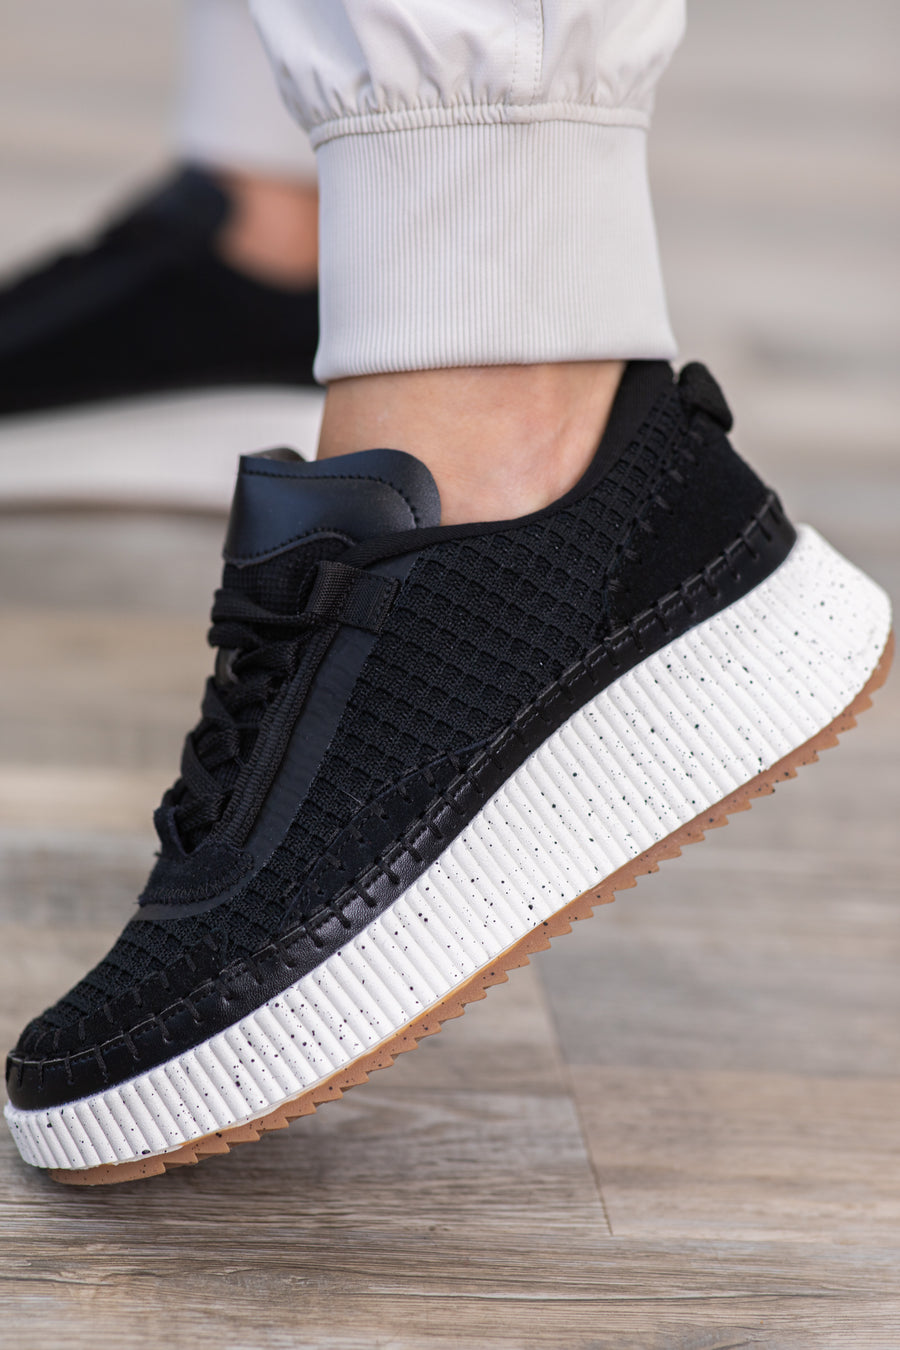 Black and White Platform Knit Sneakers